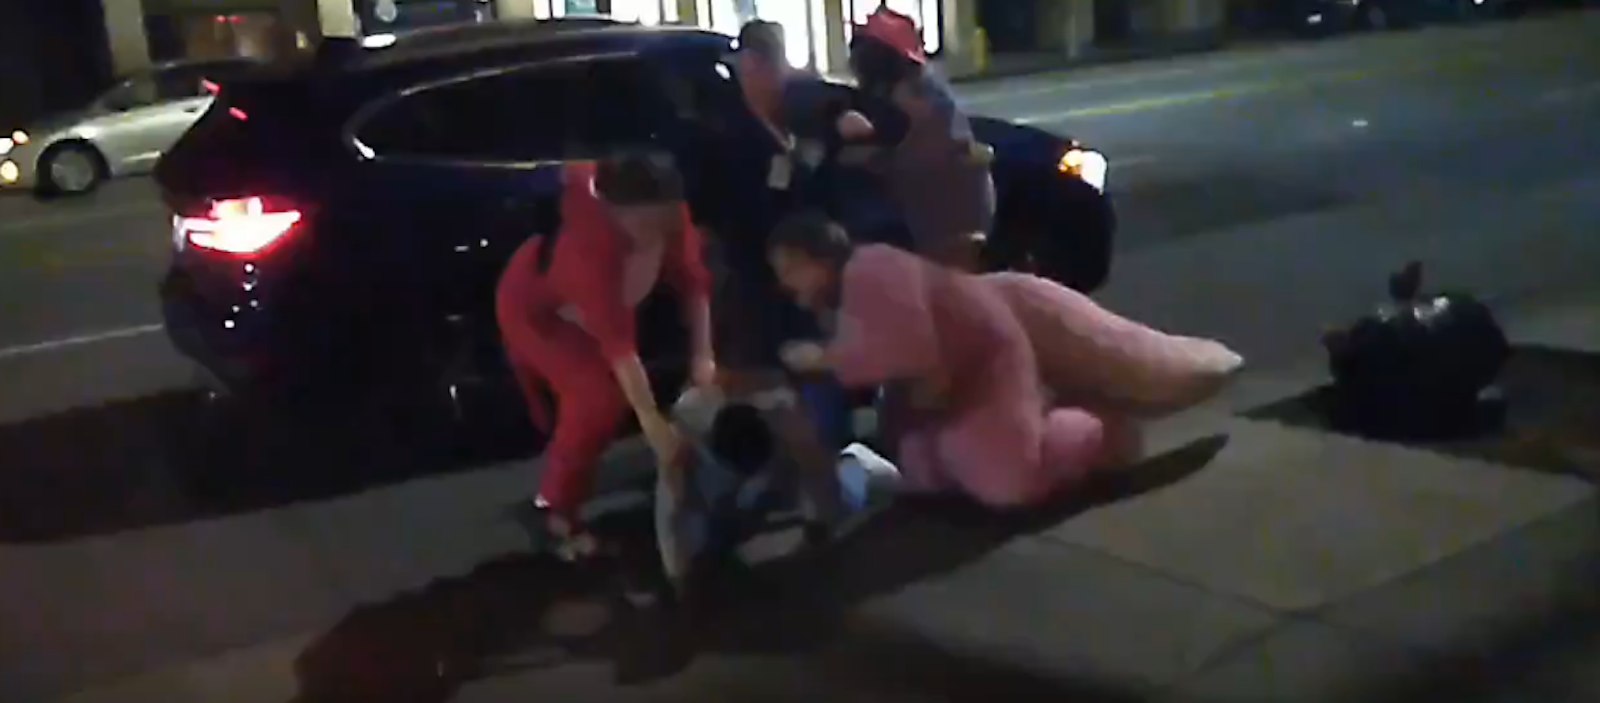 Furries on the ground, wrestling with a man accused of attacking his partner.